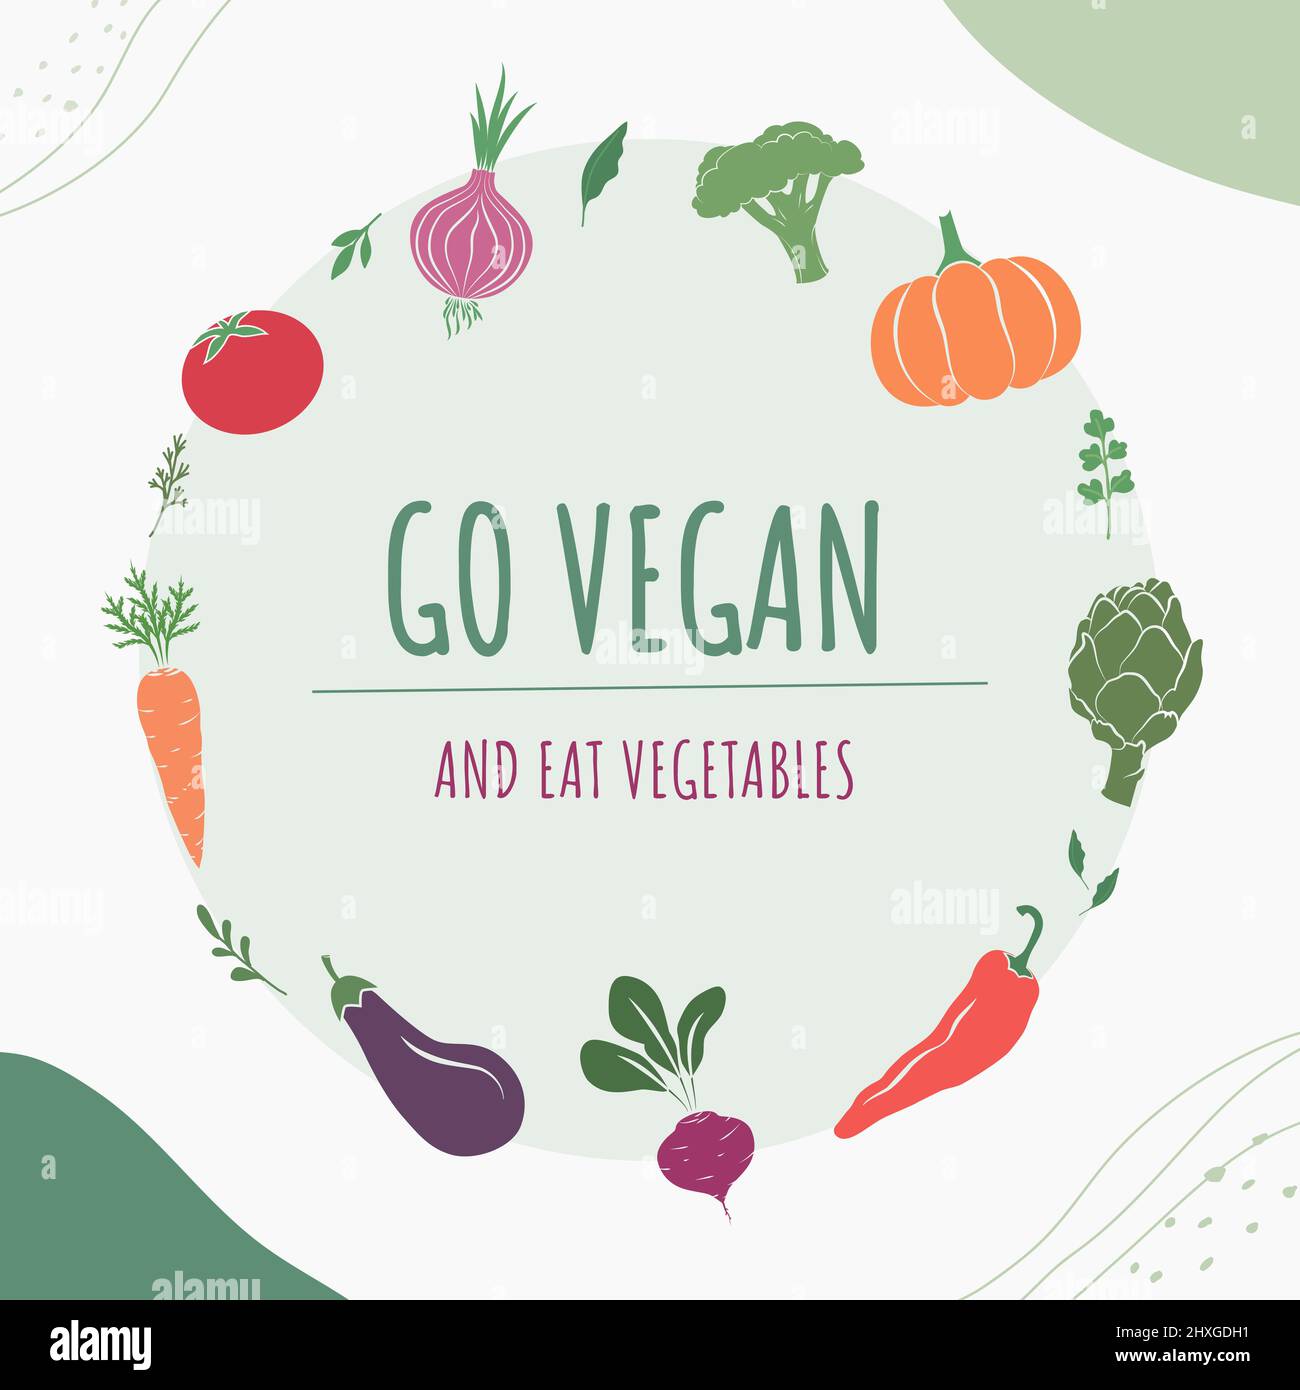 Vegetable and herbs icons, Go vegan slogan. Concept of healthy food, natural vegan products shops, and organic market. Vector illustration. Stock Vector